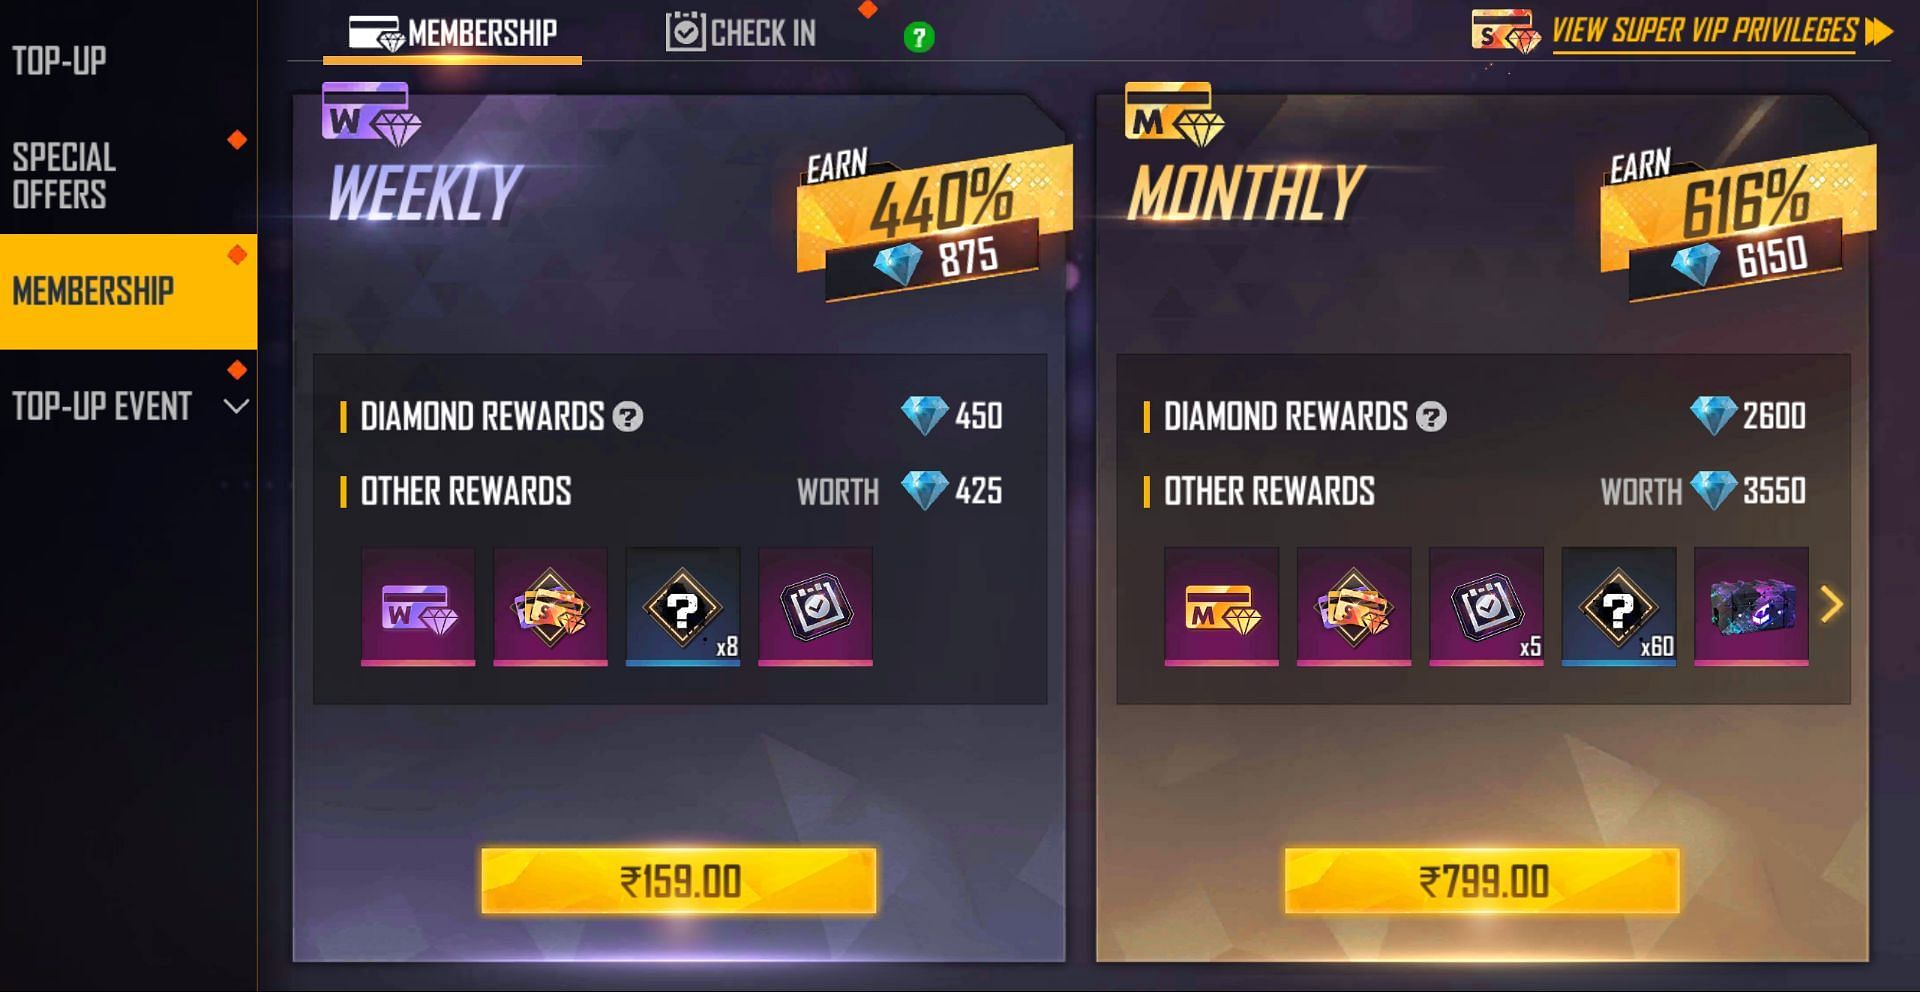 Prices of the memberships are ₹159 and ₹799 (Image via Free Fire)